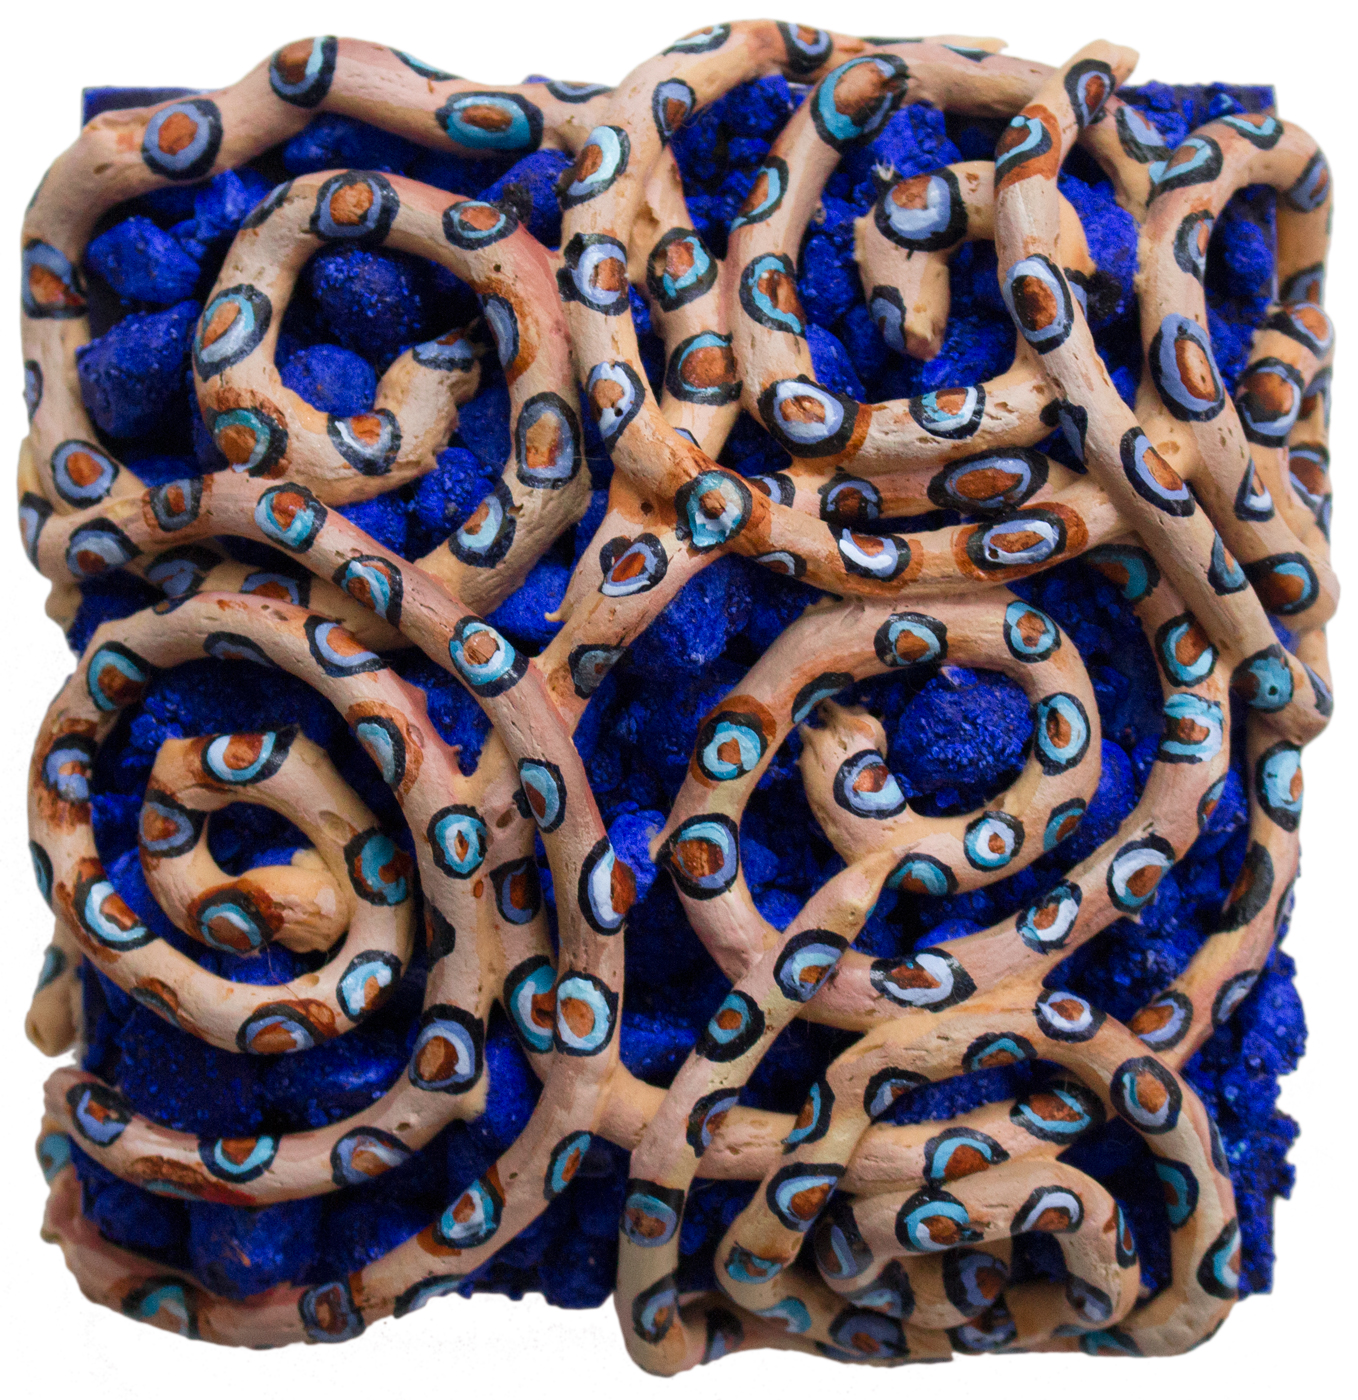 Blue Spot Octopi Infinity Mini, 2020, Ultralight, pumice and dispersions on panel, 6 x 6 x 4.5 inches